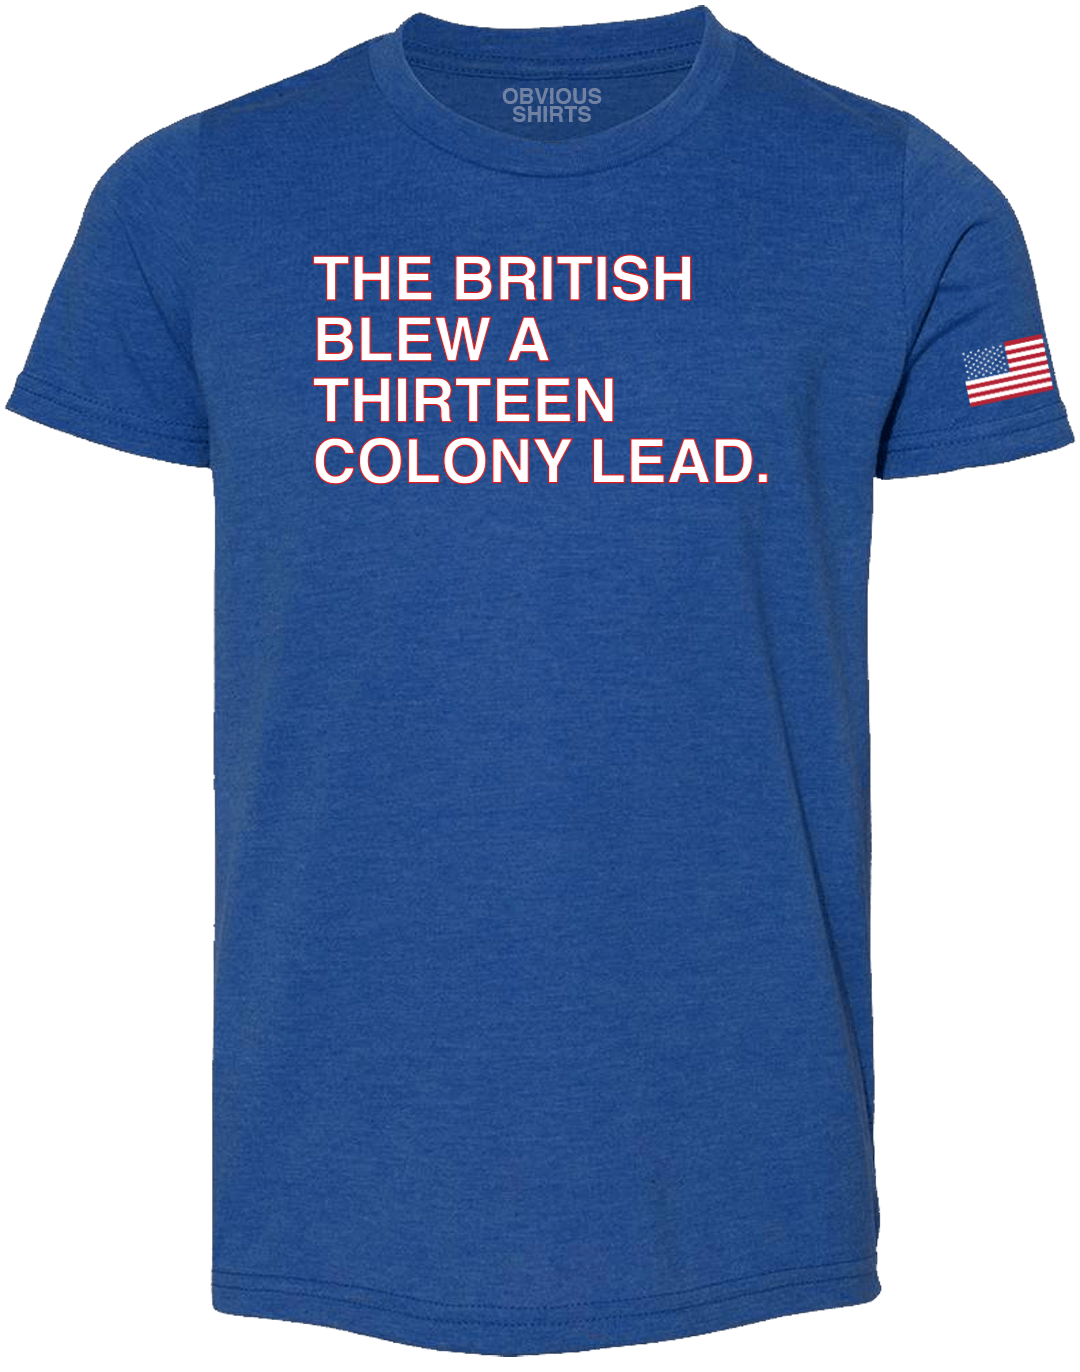 THE BRITISH BLEW A THIRTEEN COLONY LEAD (YOUTH) - OBVIOUS SHIRTS